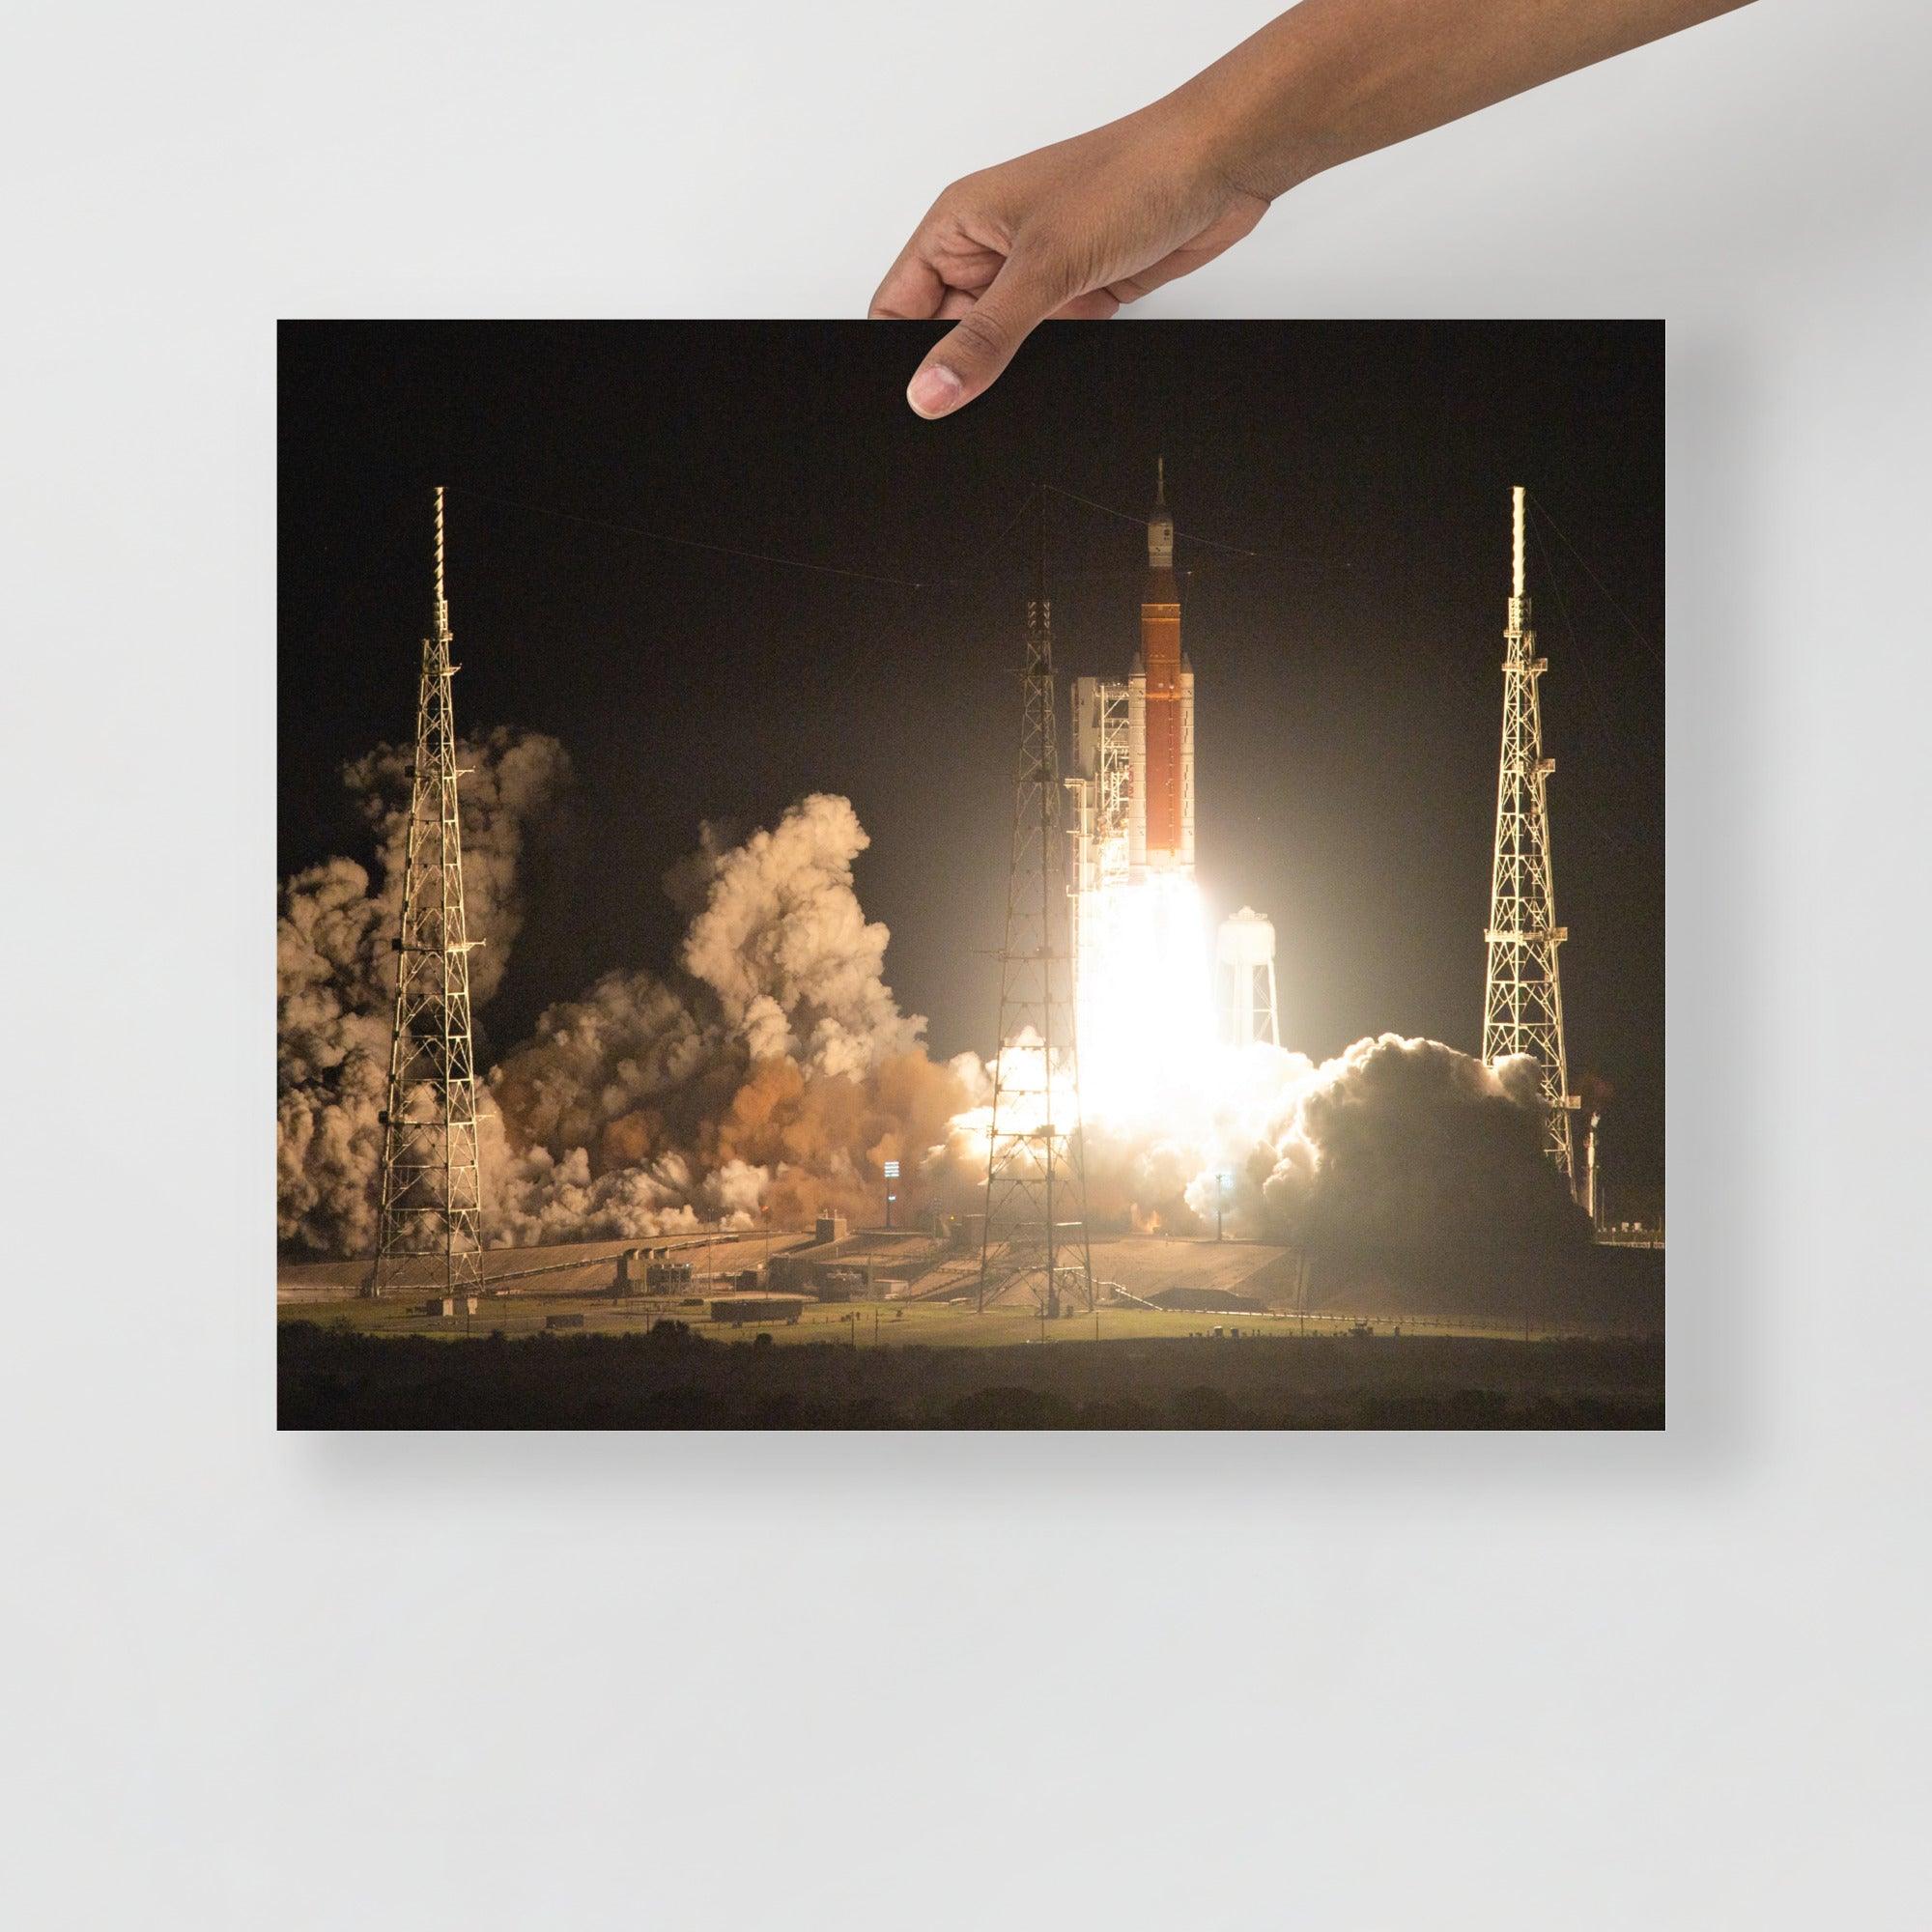 An Artemis 1 poster on a plain backdrop in size 16x20”.